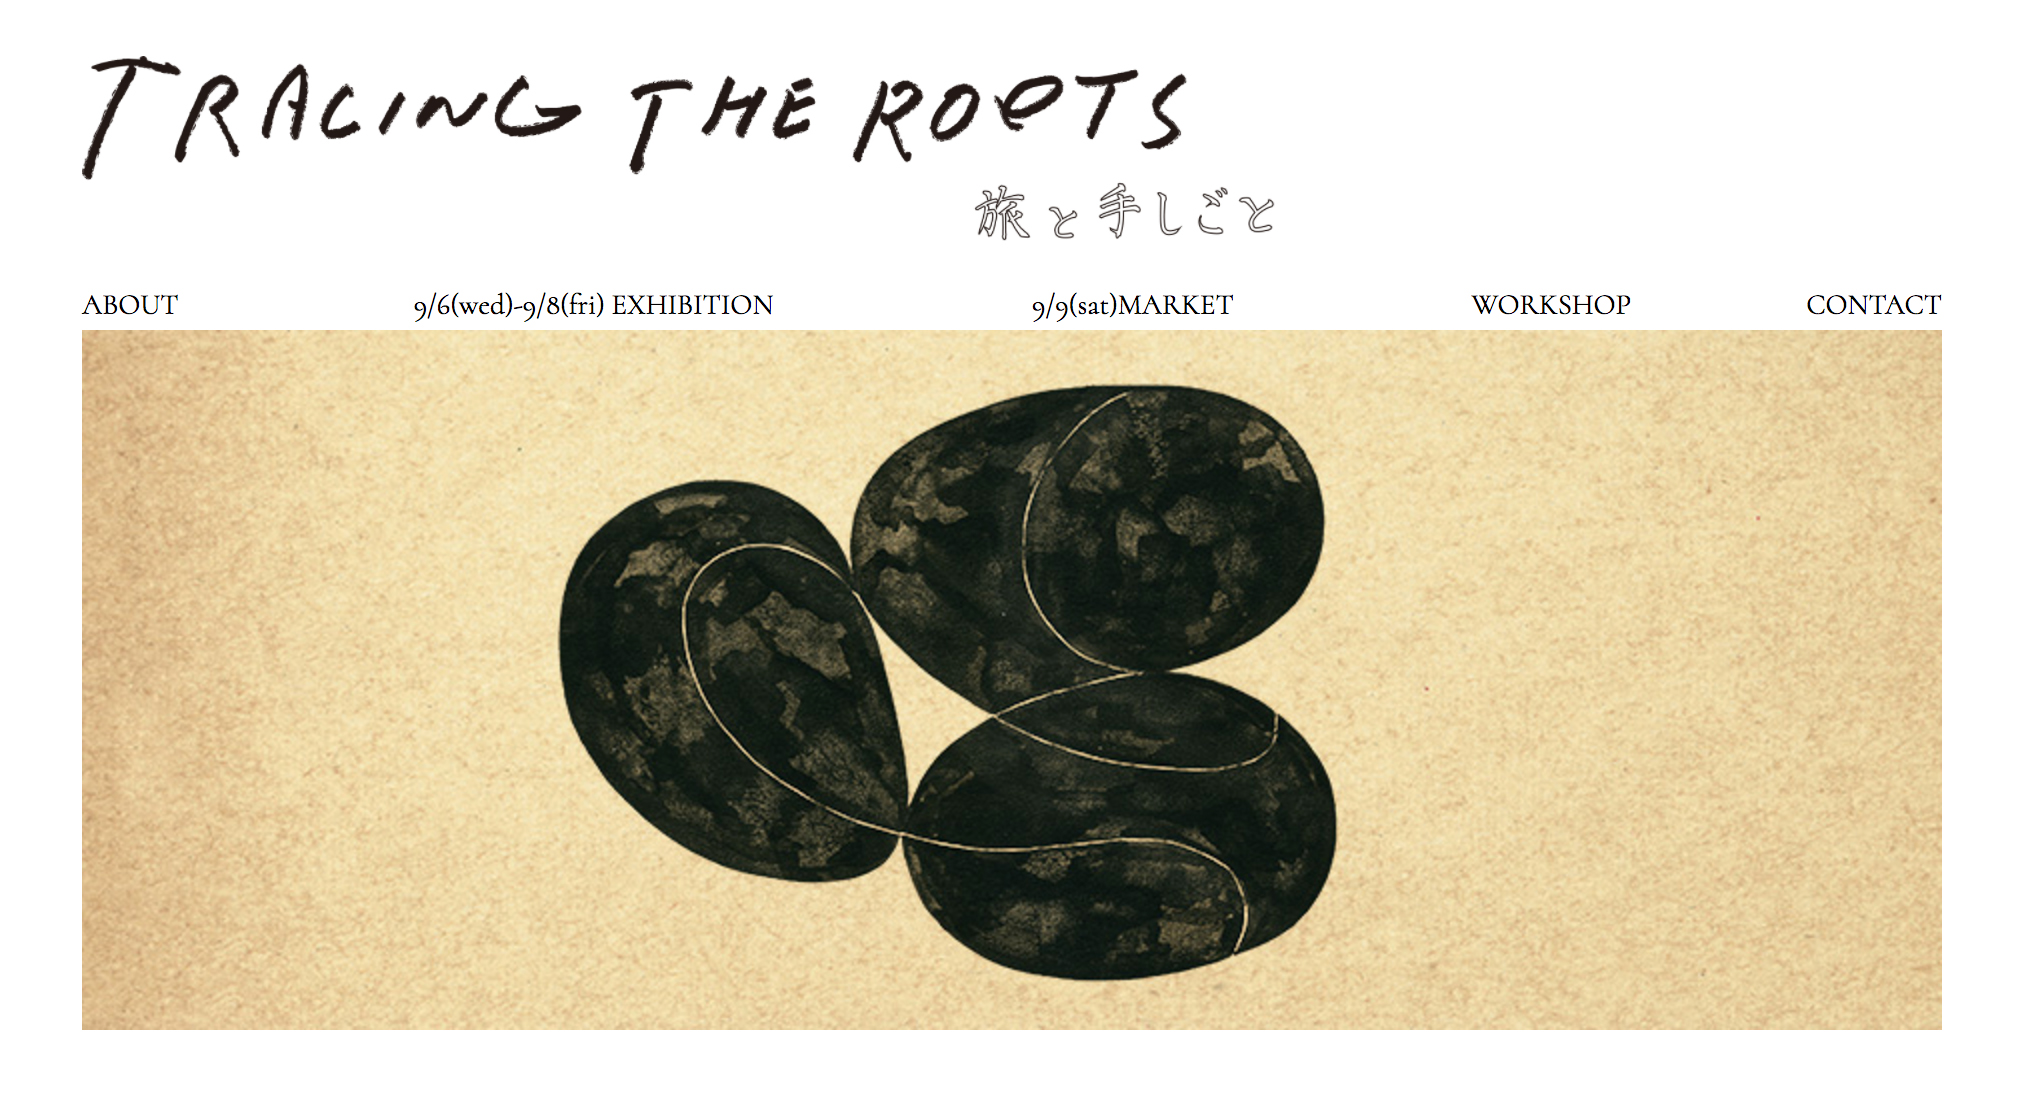 TRACING THE ROOTS 旅と手しごと